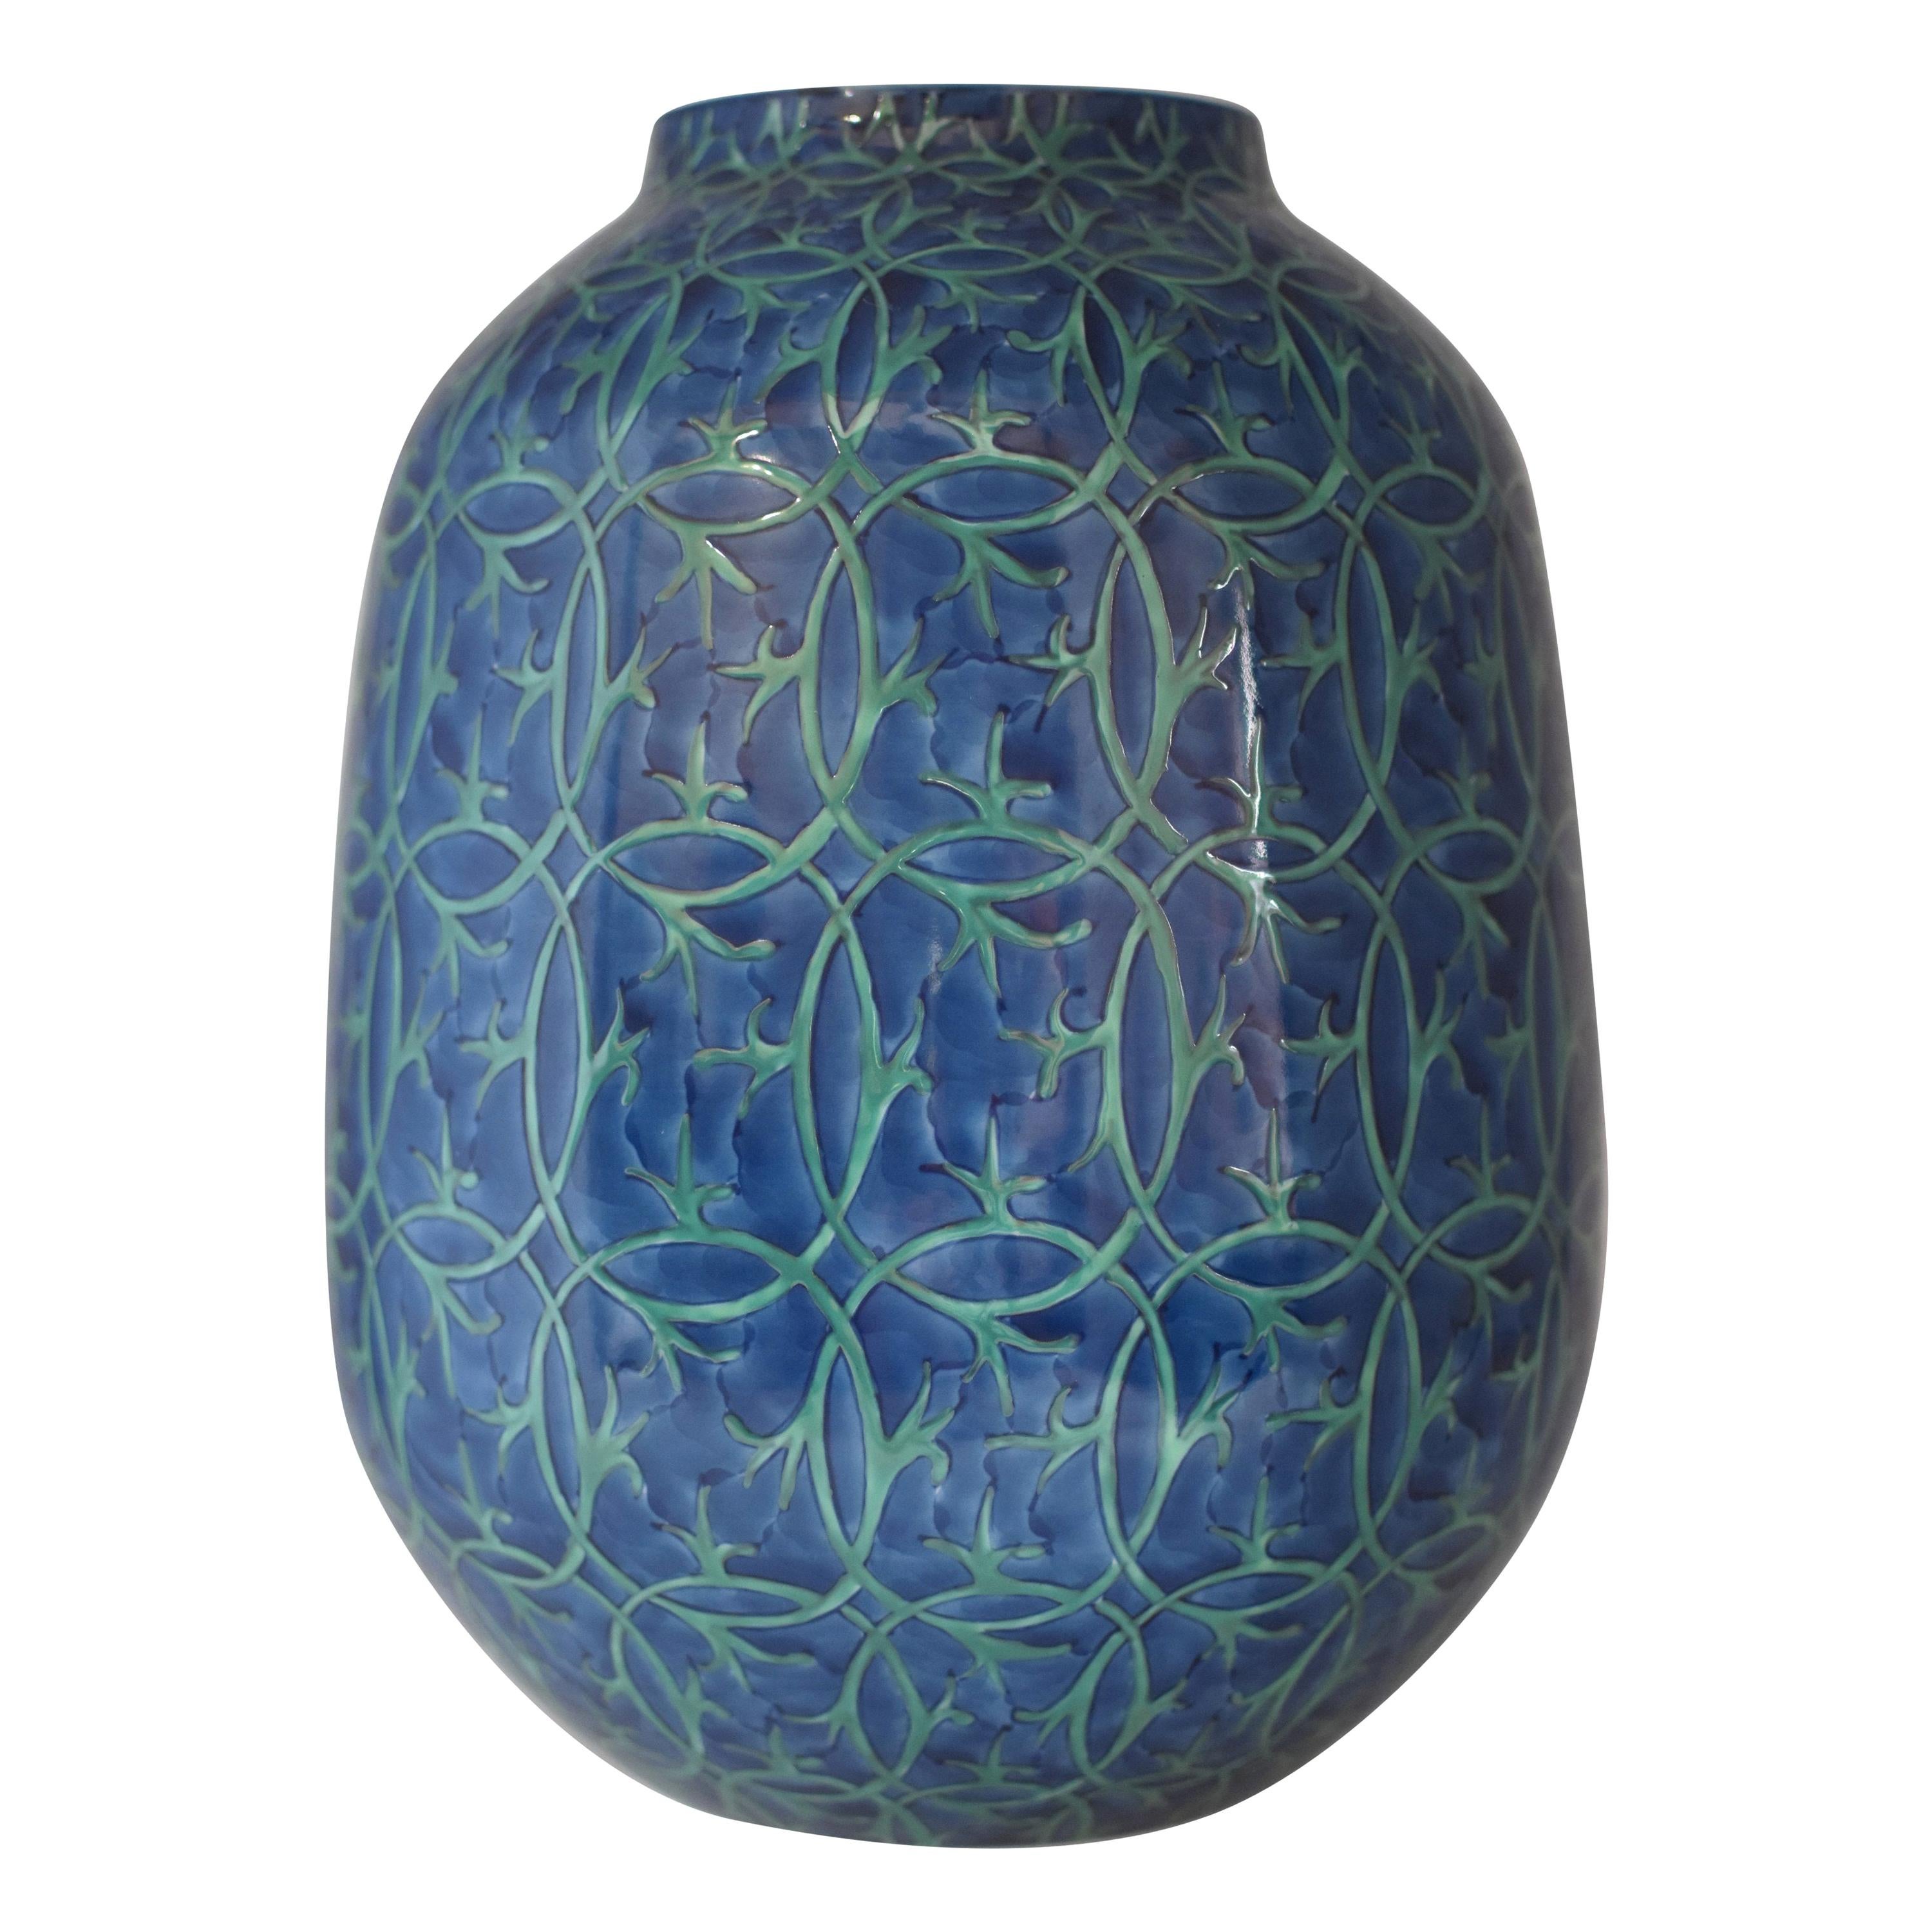 Japanese Blue and Green Porcelain Vase by Contemporary Master Artist